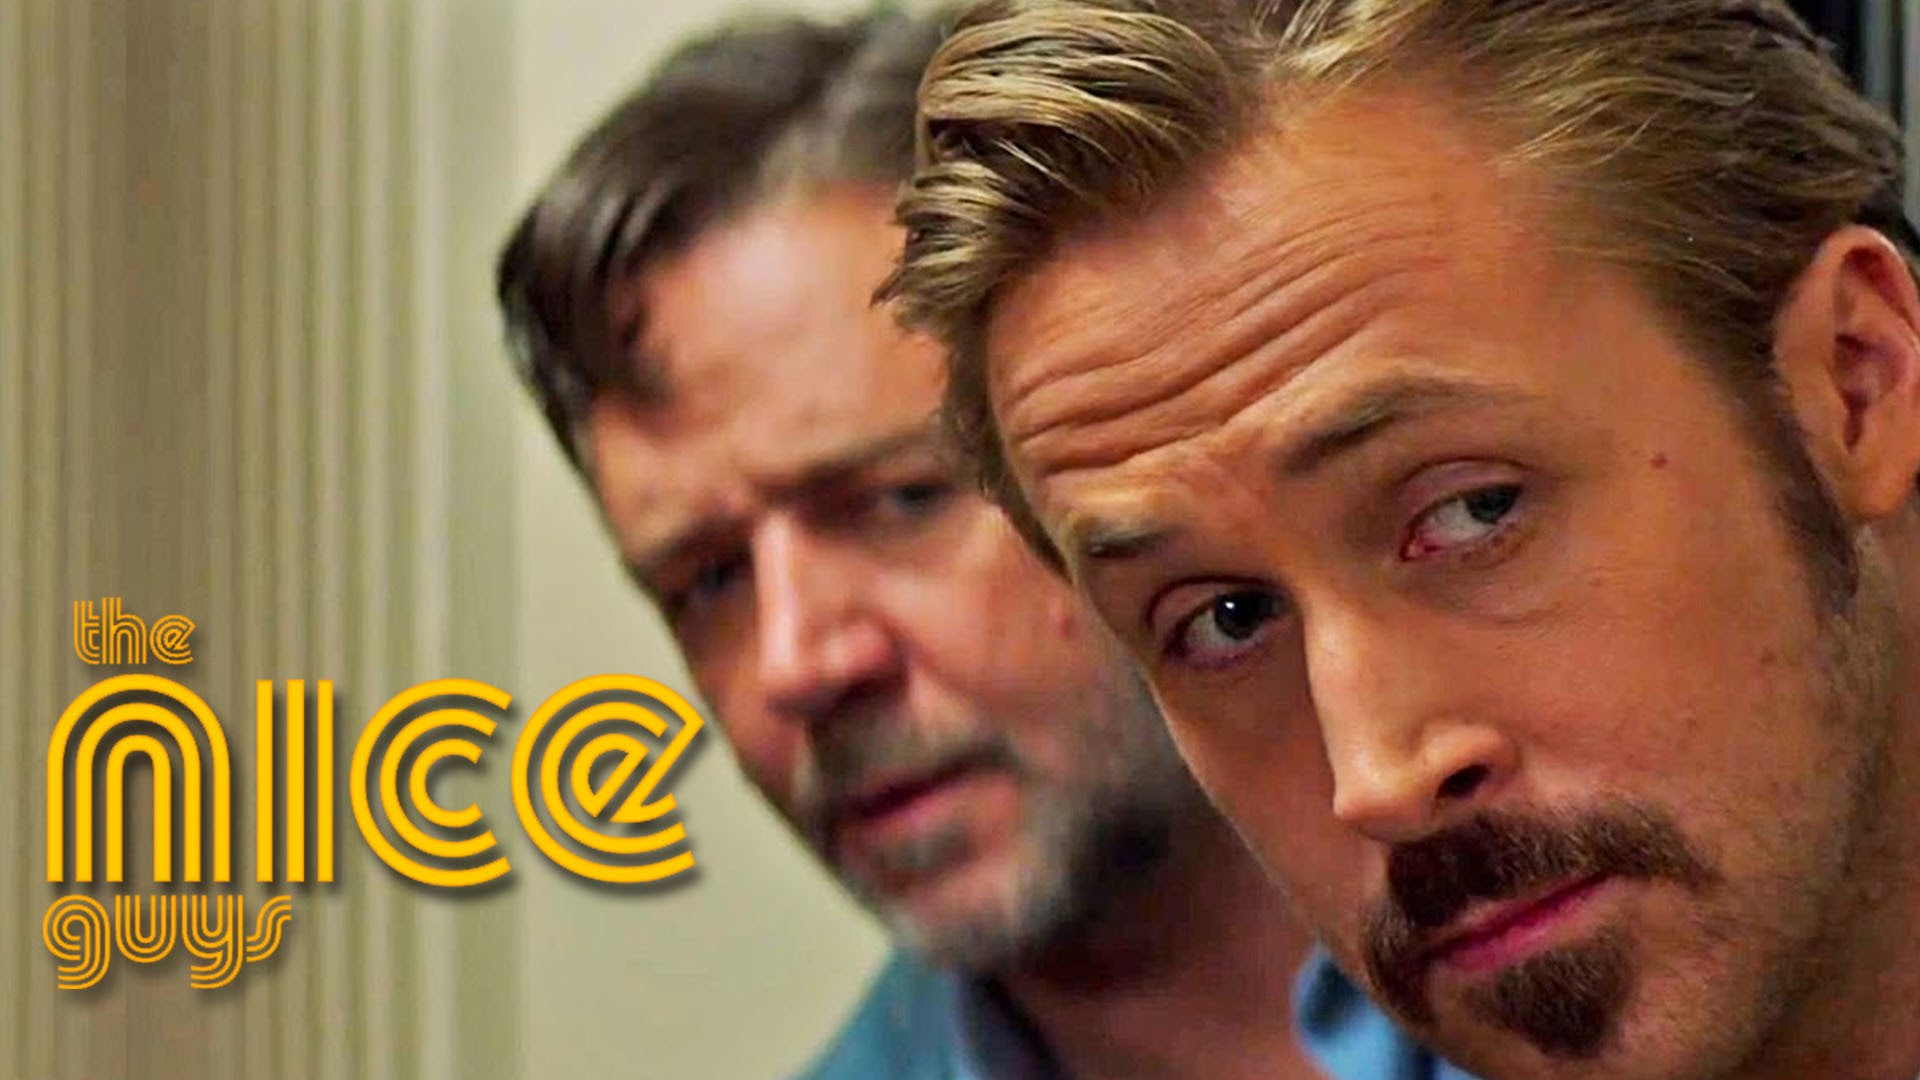 Watch "The Nice Guys" (And Not Just For Ryan Gosling)